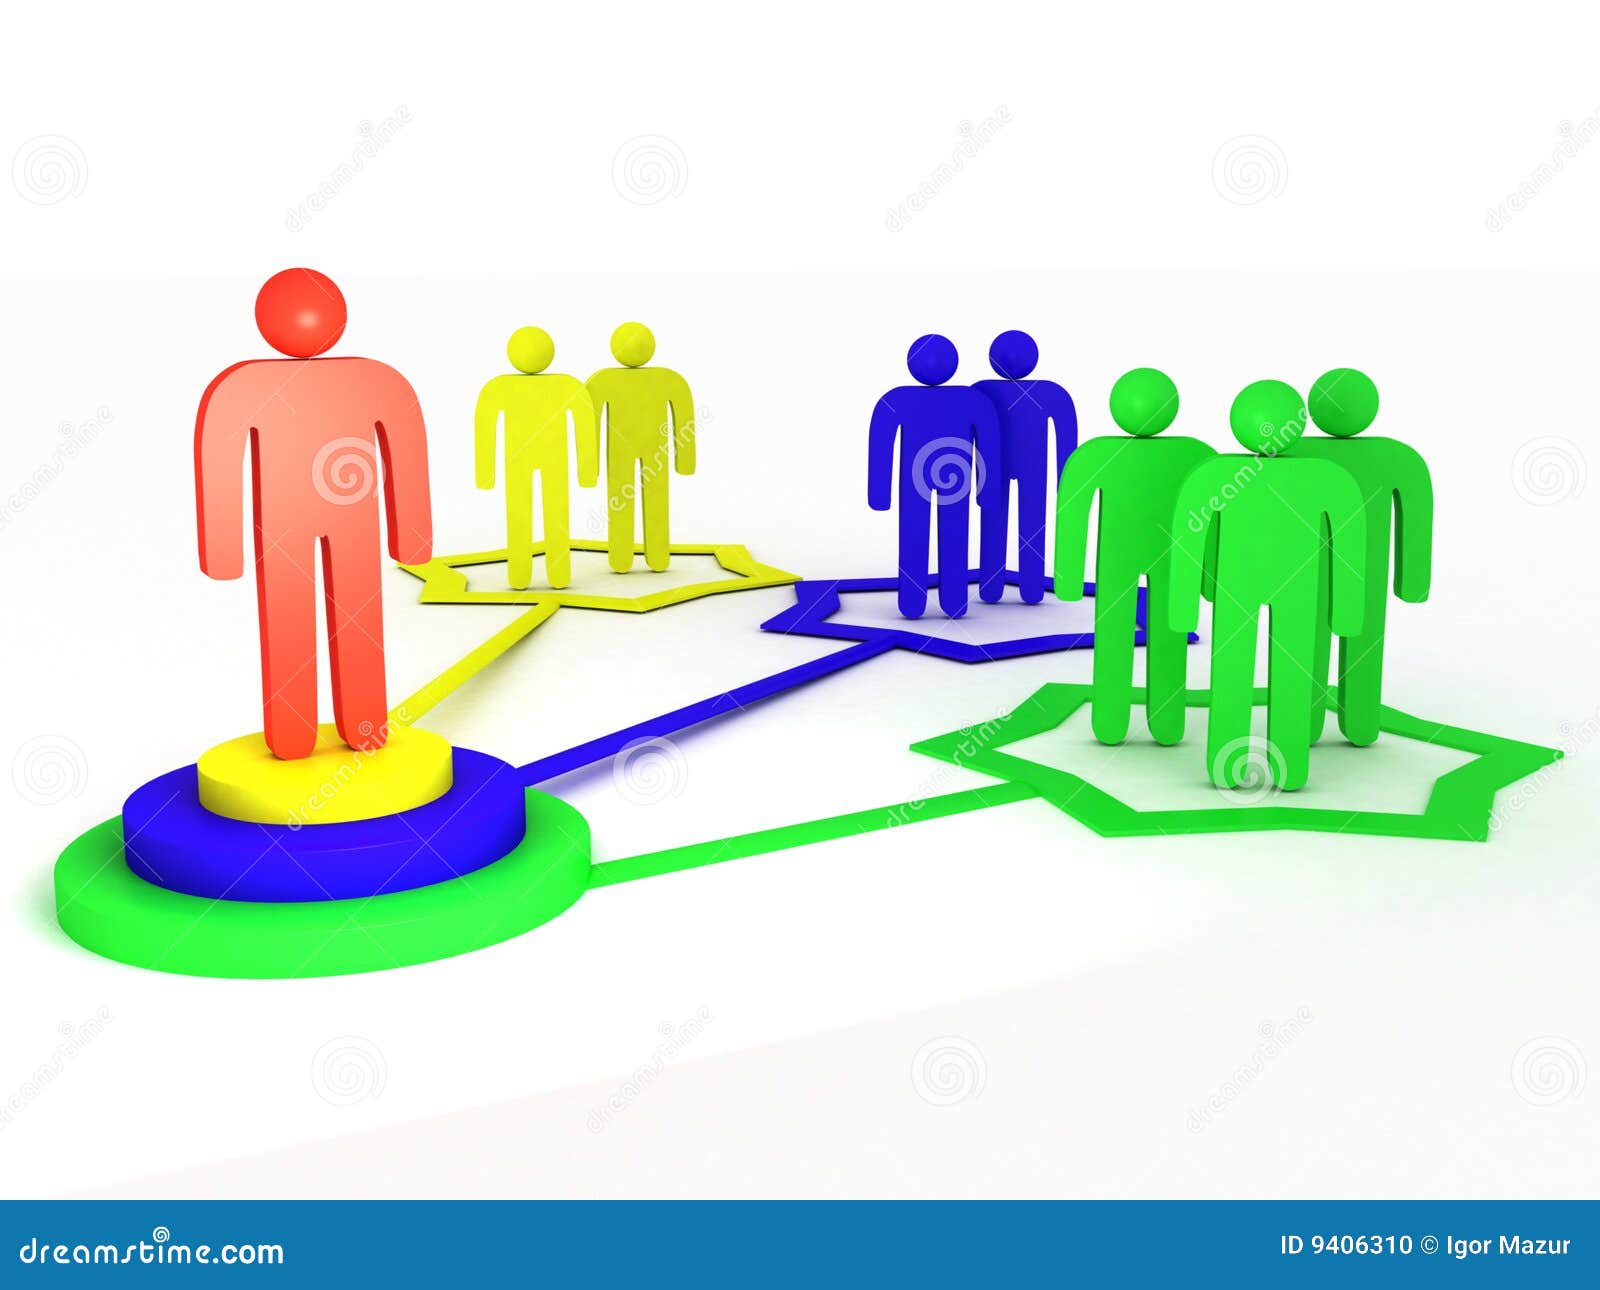 clipart for network - photo #38